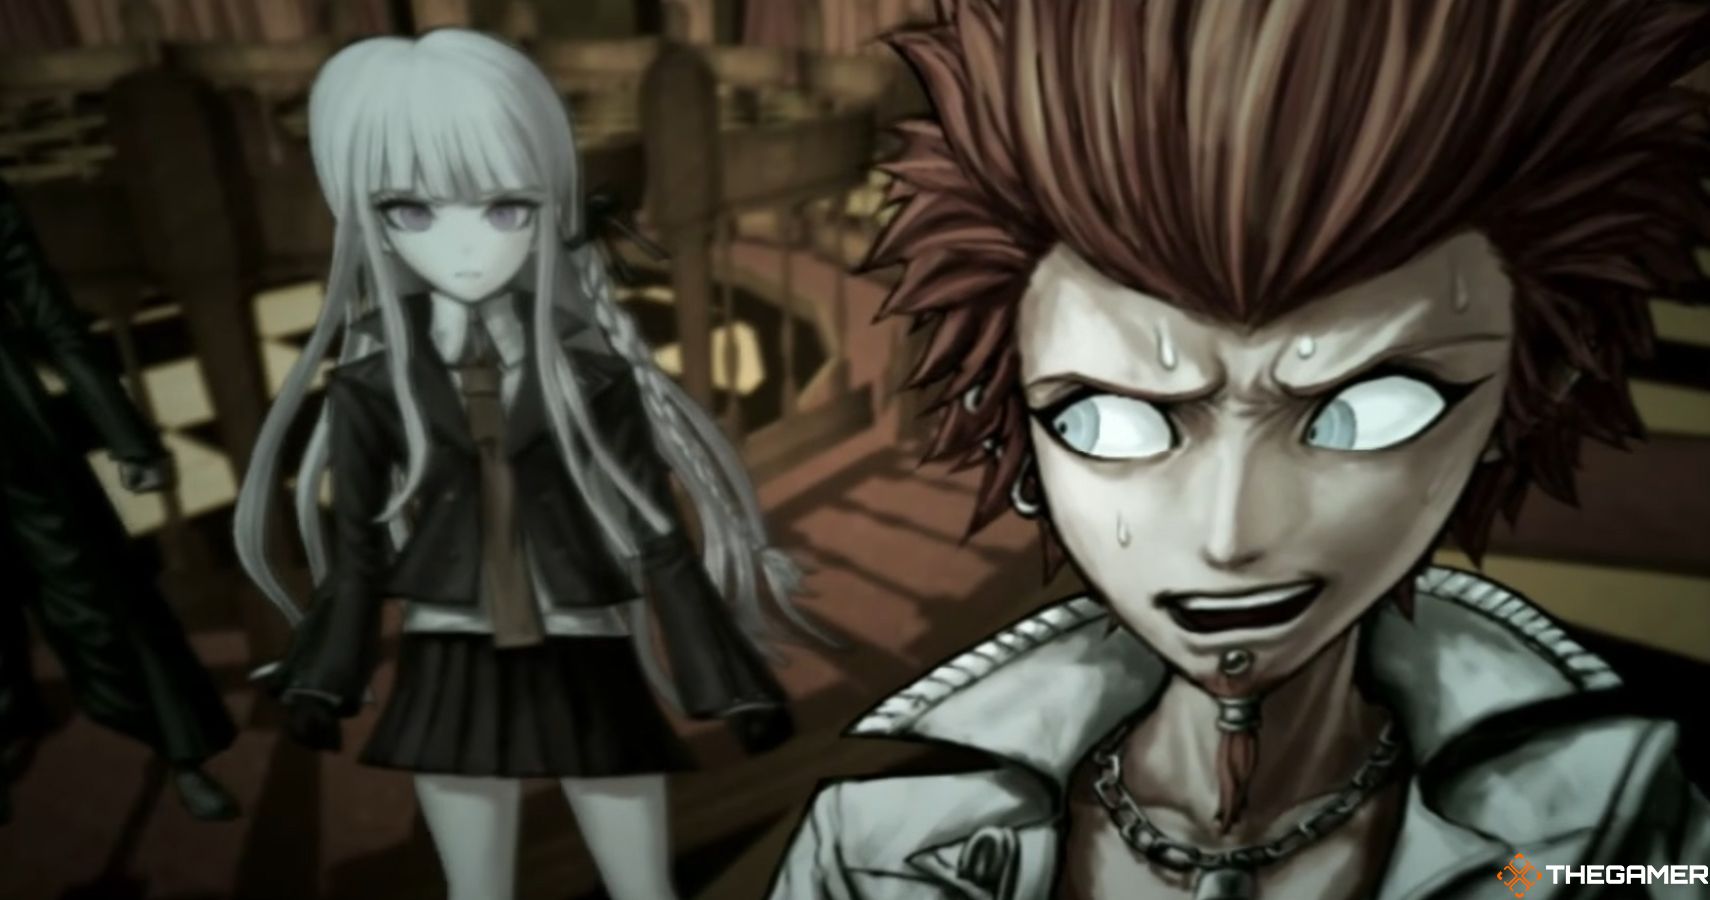 Every Execution In Danganronpa: Trigger Happy Havoc, Ranked